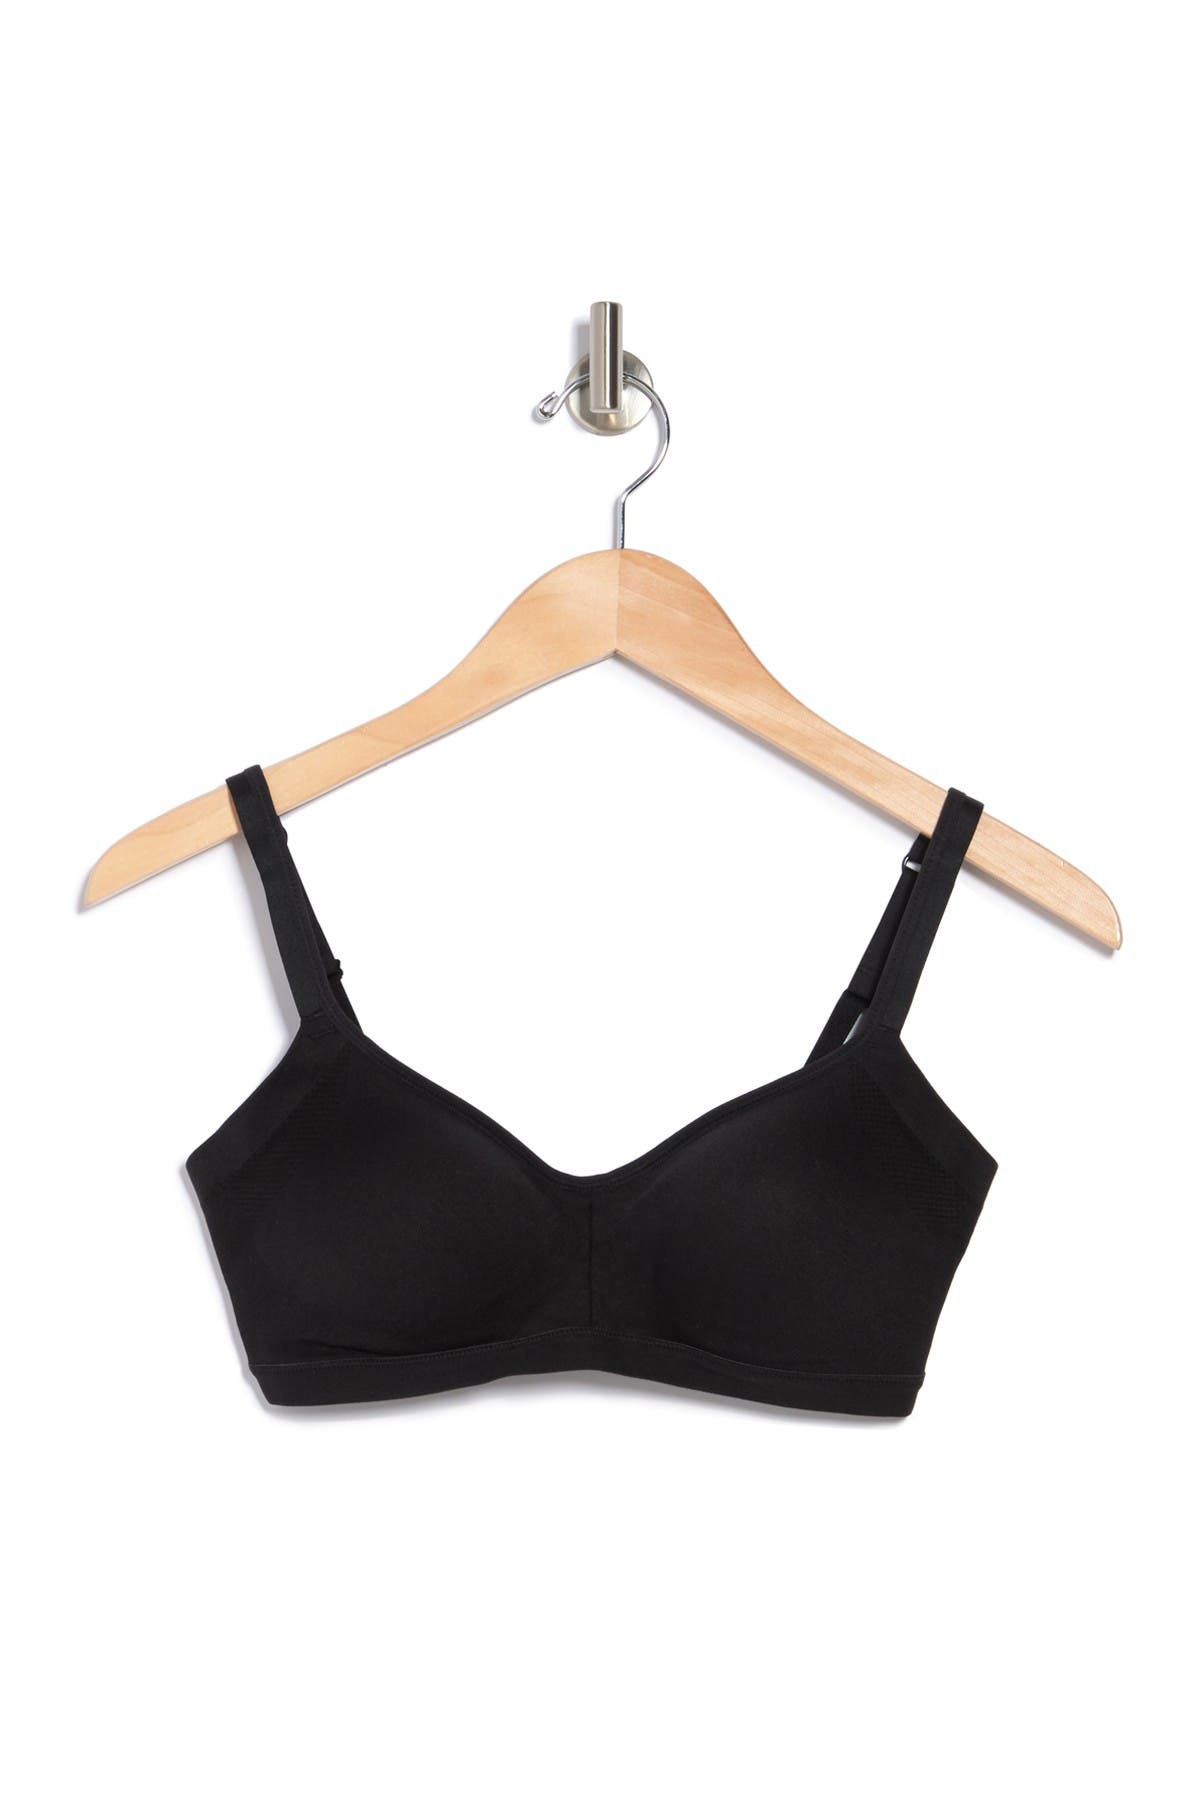 Warner's Warners® Easy Does It® Underarm-Smoothing with Seamless Stretch  Wireless Lightly Lined Comfort Bra RM3911A - Macy's